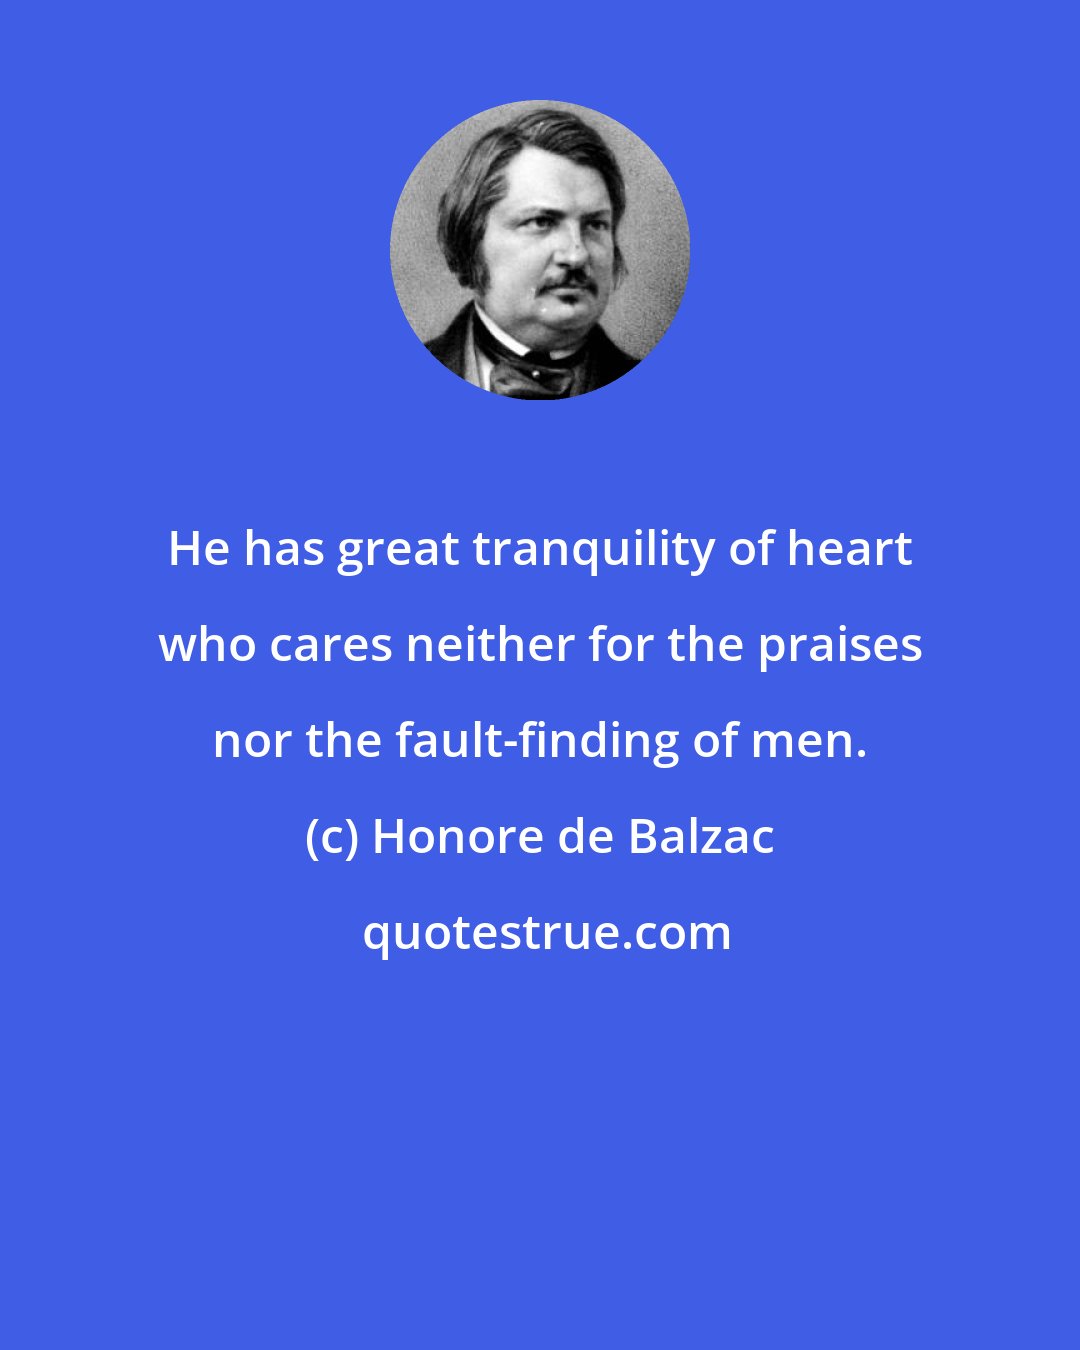 Honore de Balzac: He has great tranquility of heart who cares neither for the praises nor the fault-finding of men.